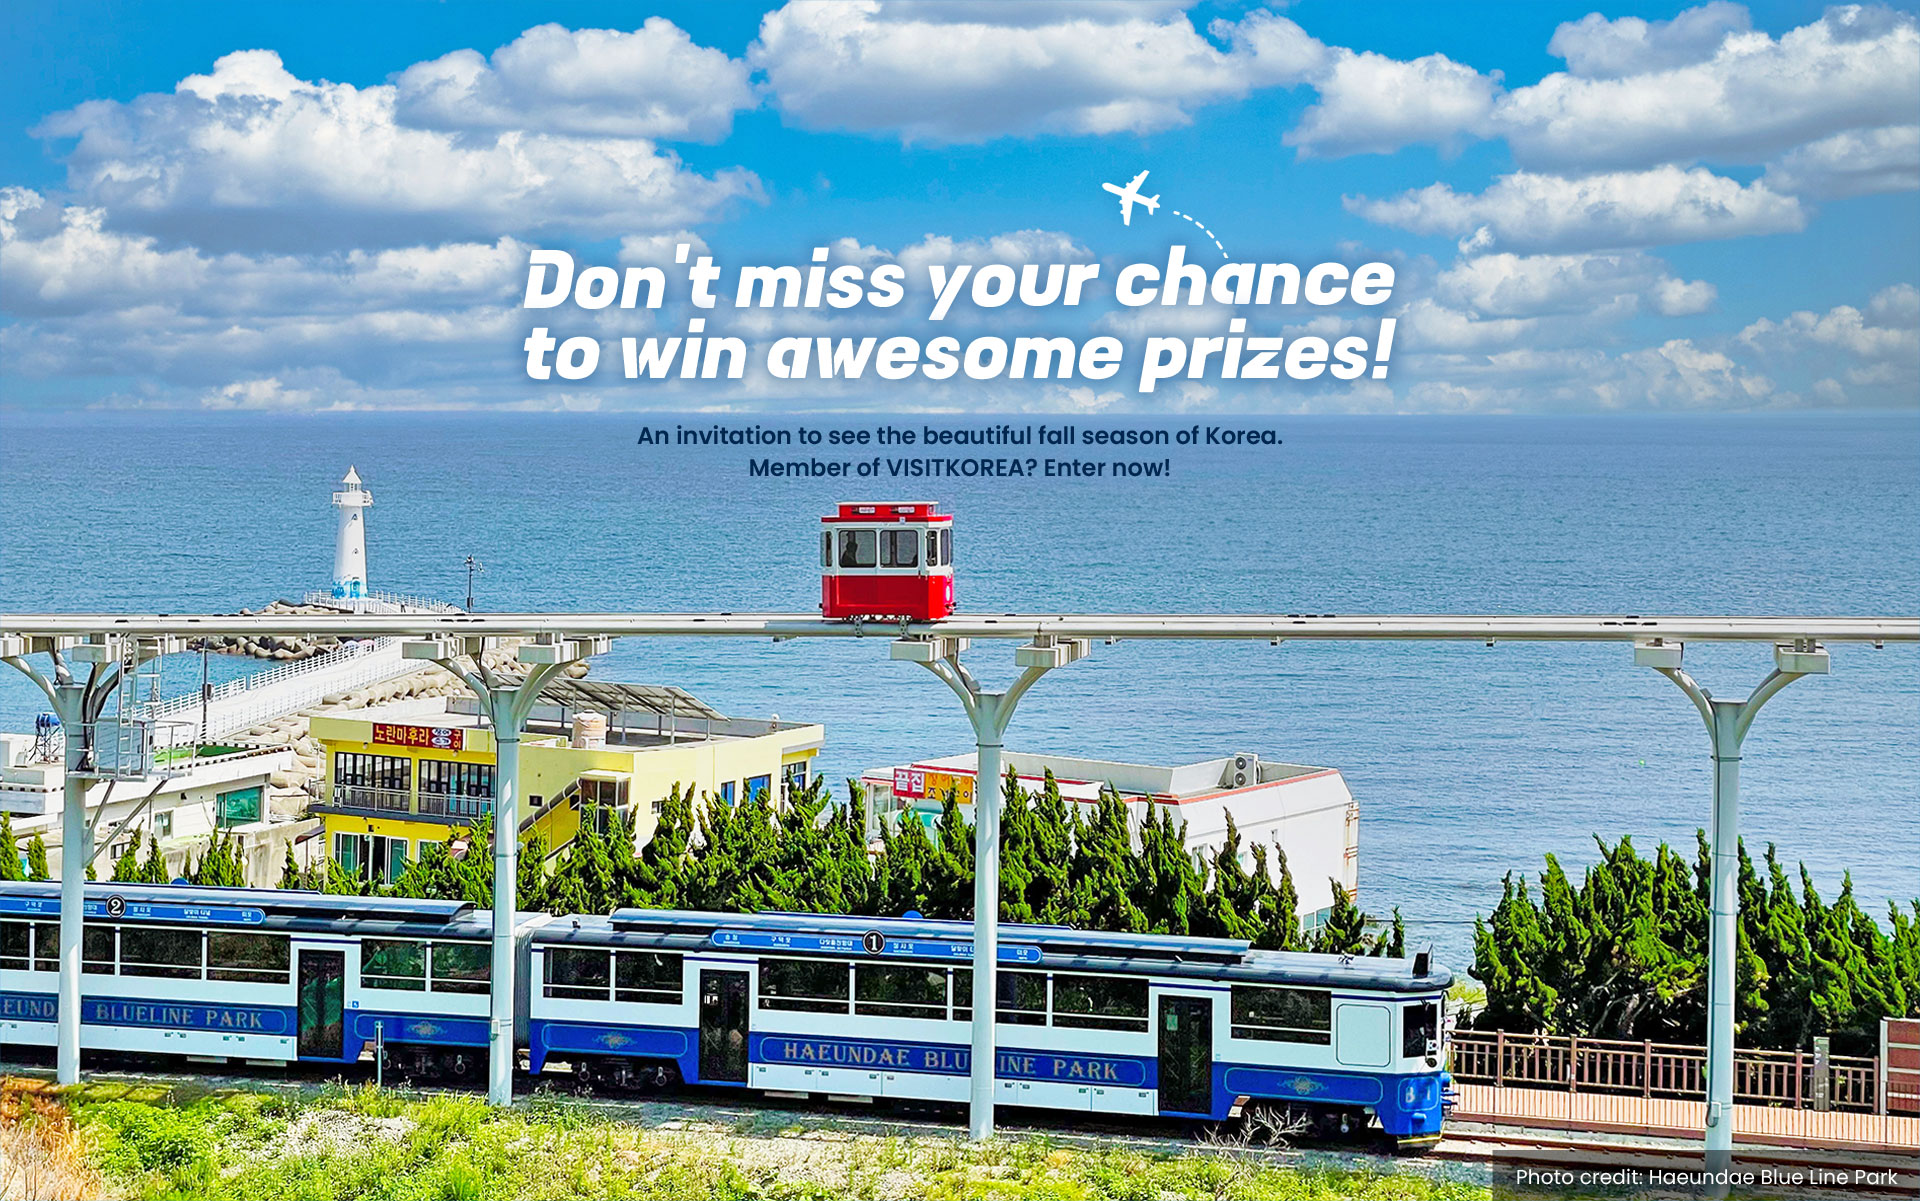 Reserve a tour for a chance to win big prizes! An invitation to see the beautiful fall season of Korea. Member of VISITKOREA? Enter now!